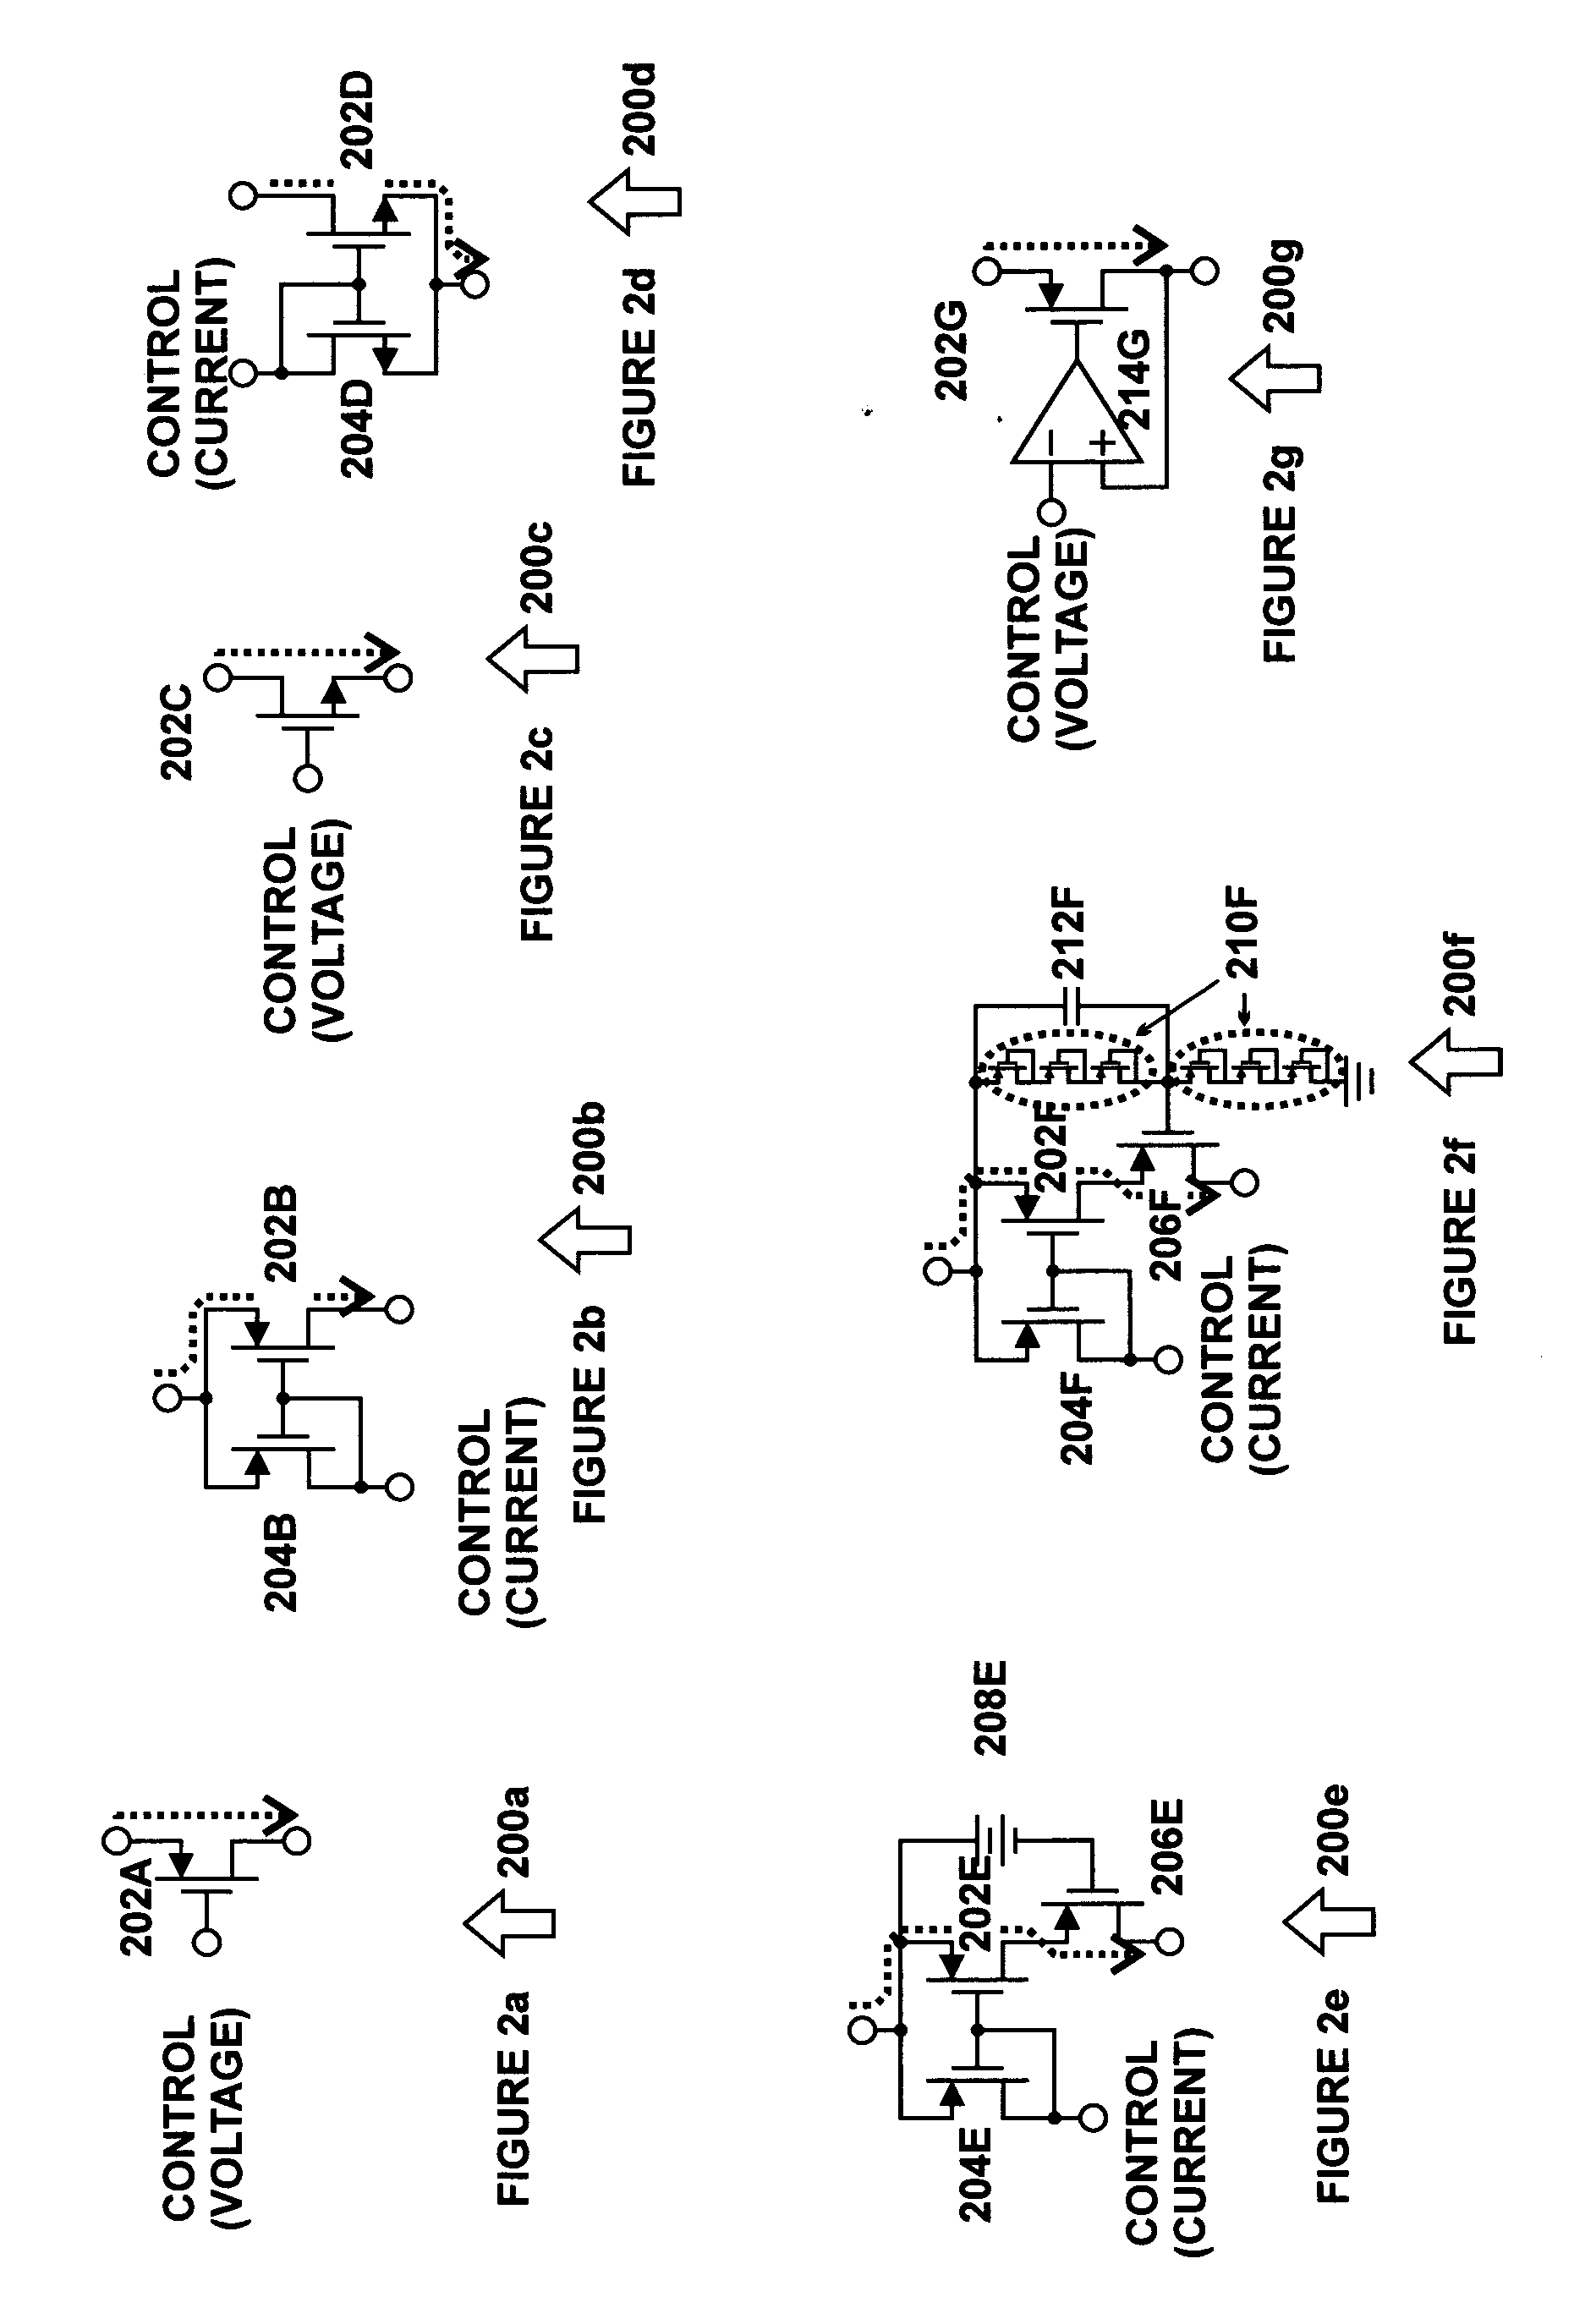 Distributed active transformer power control techiques